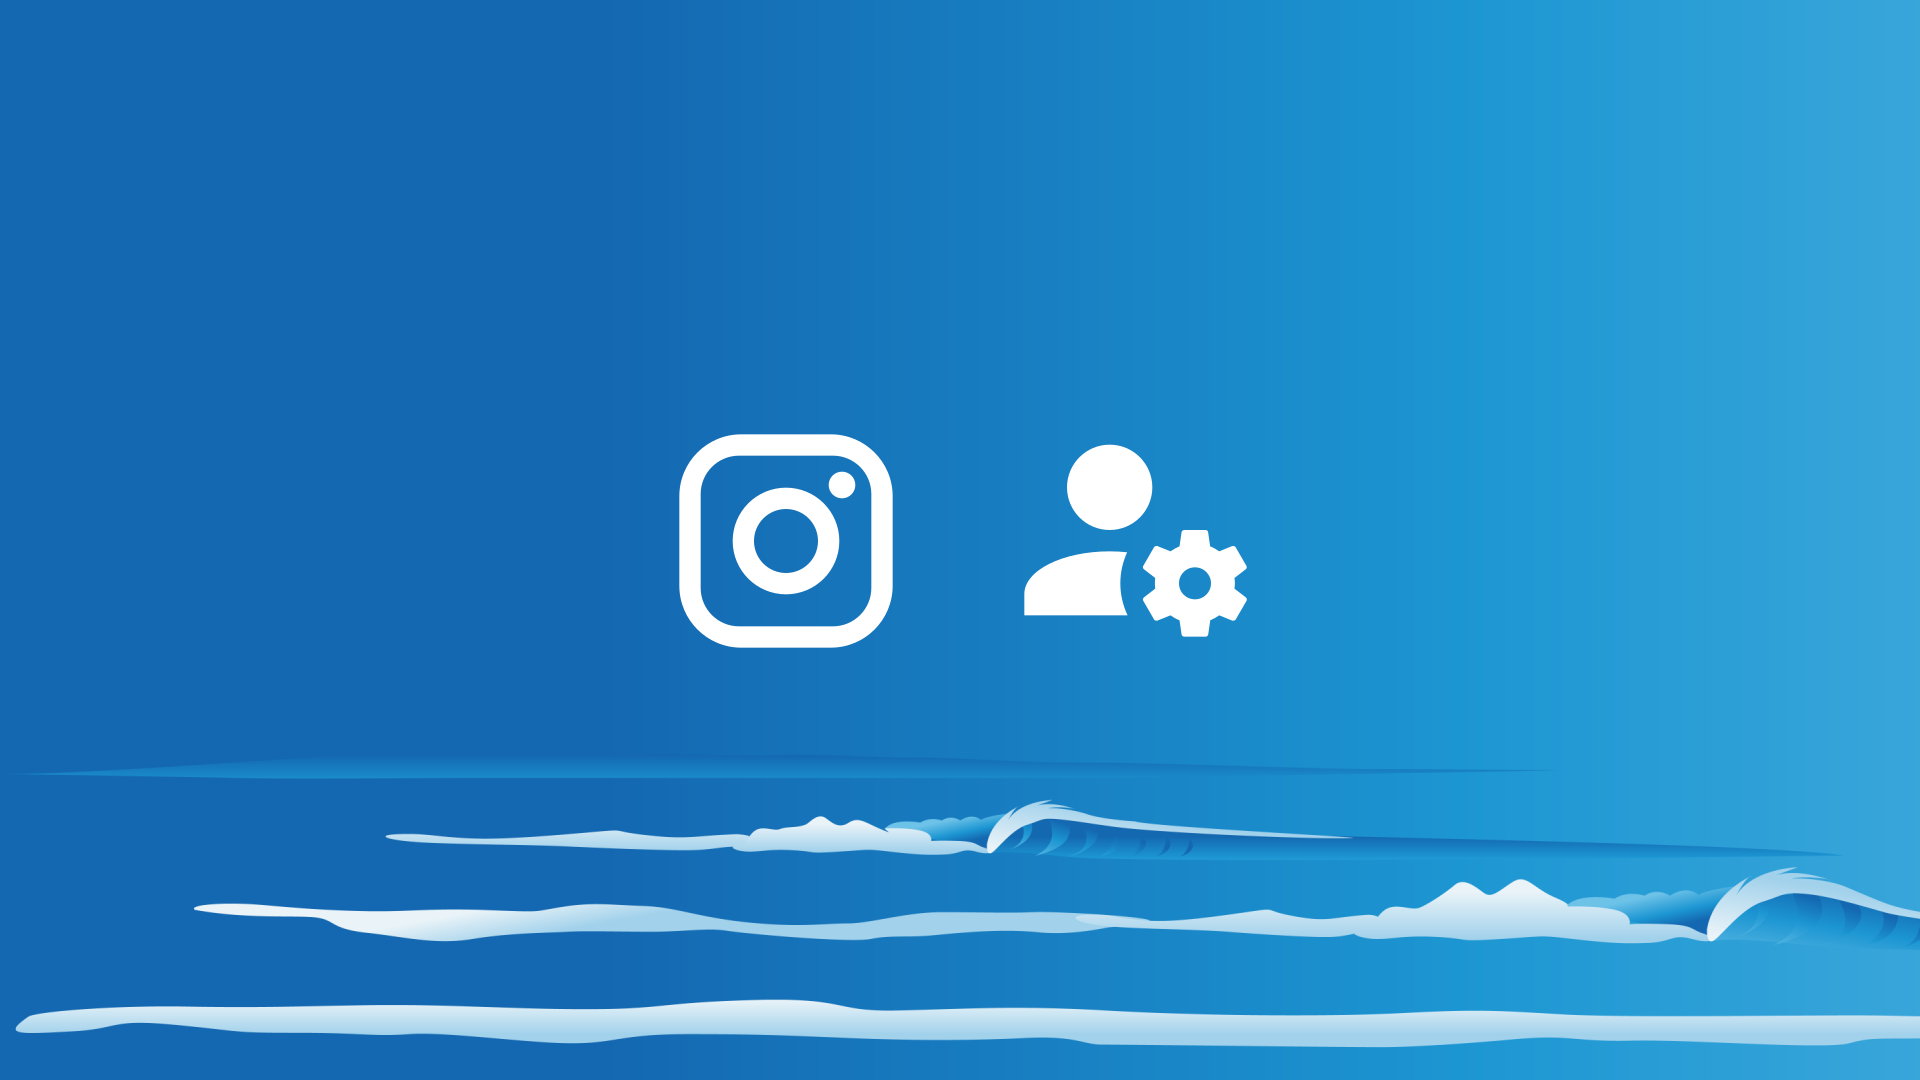 Sea background with Instagram logo and account settings icon